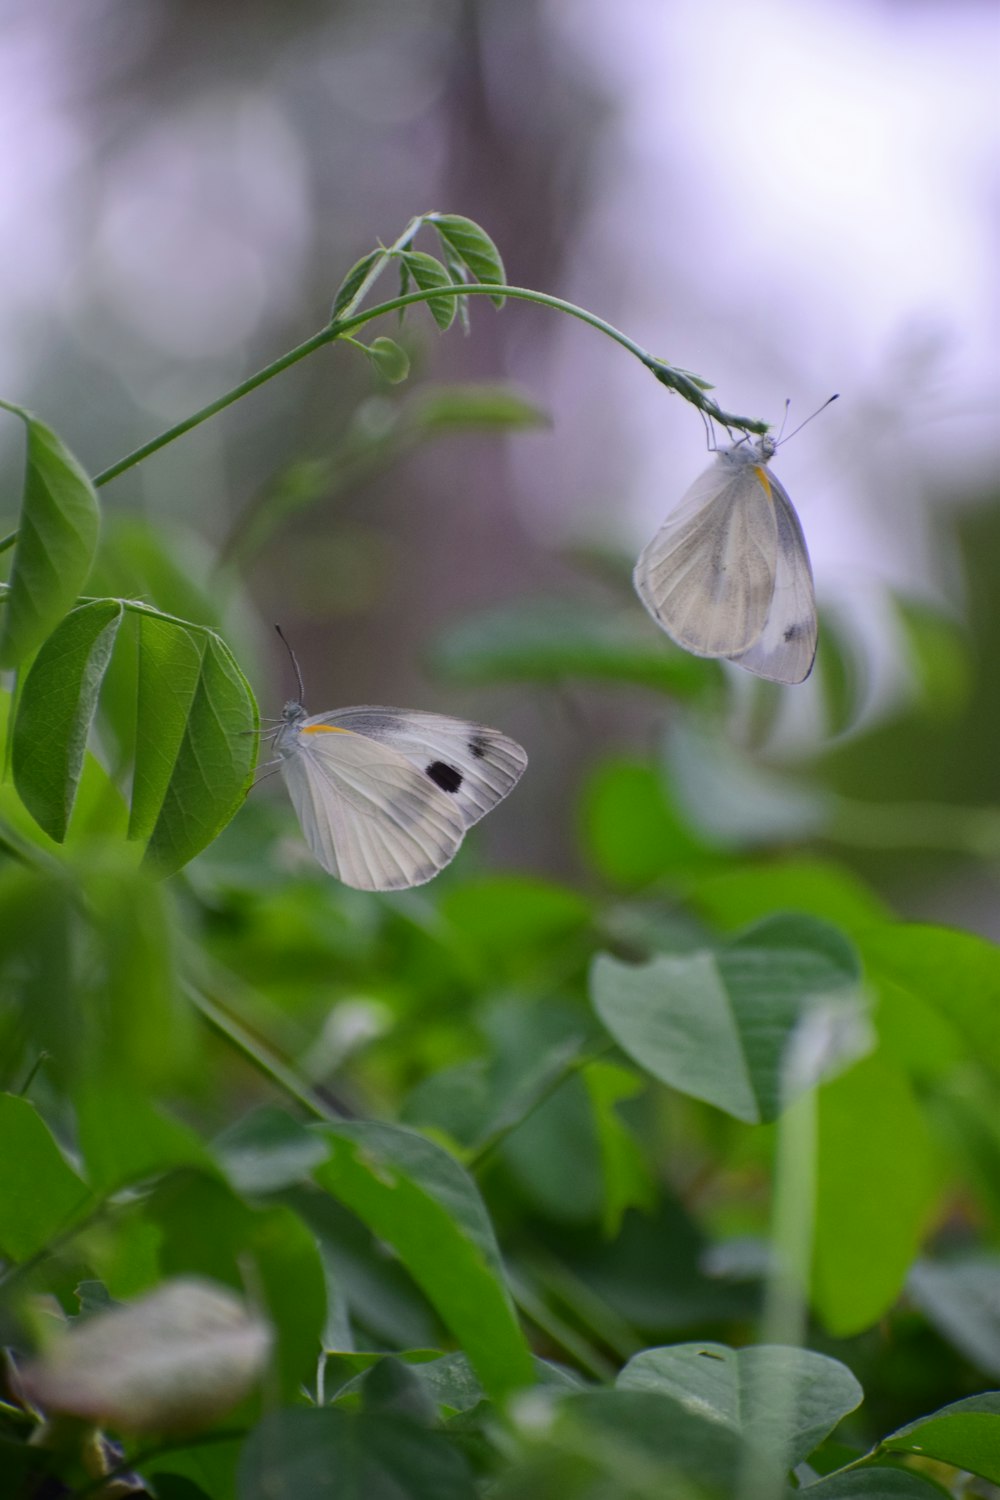 white butterfly perched on green leaf in close up photography during daytime